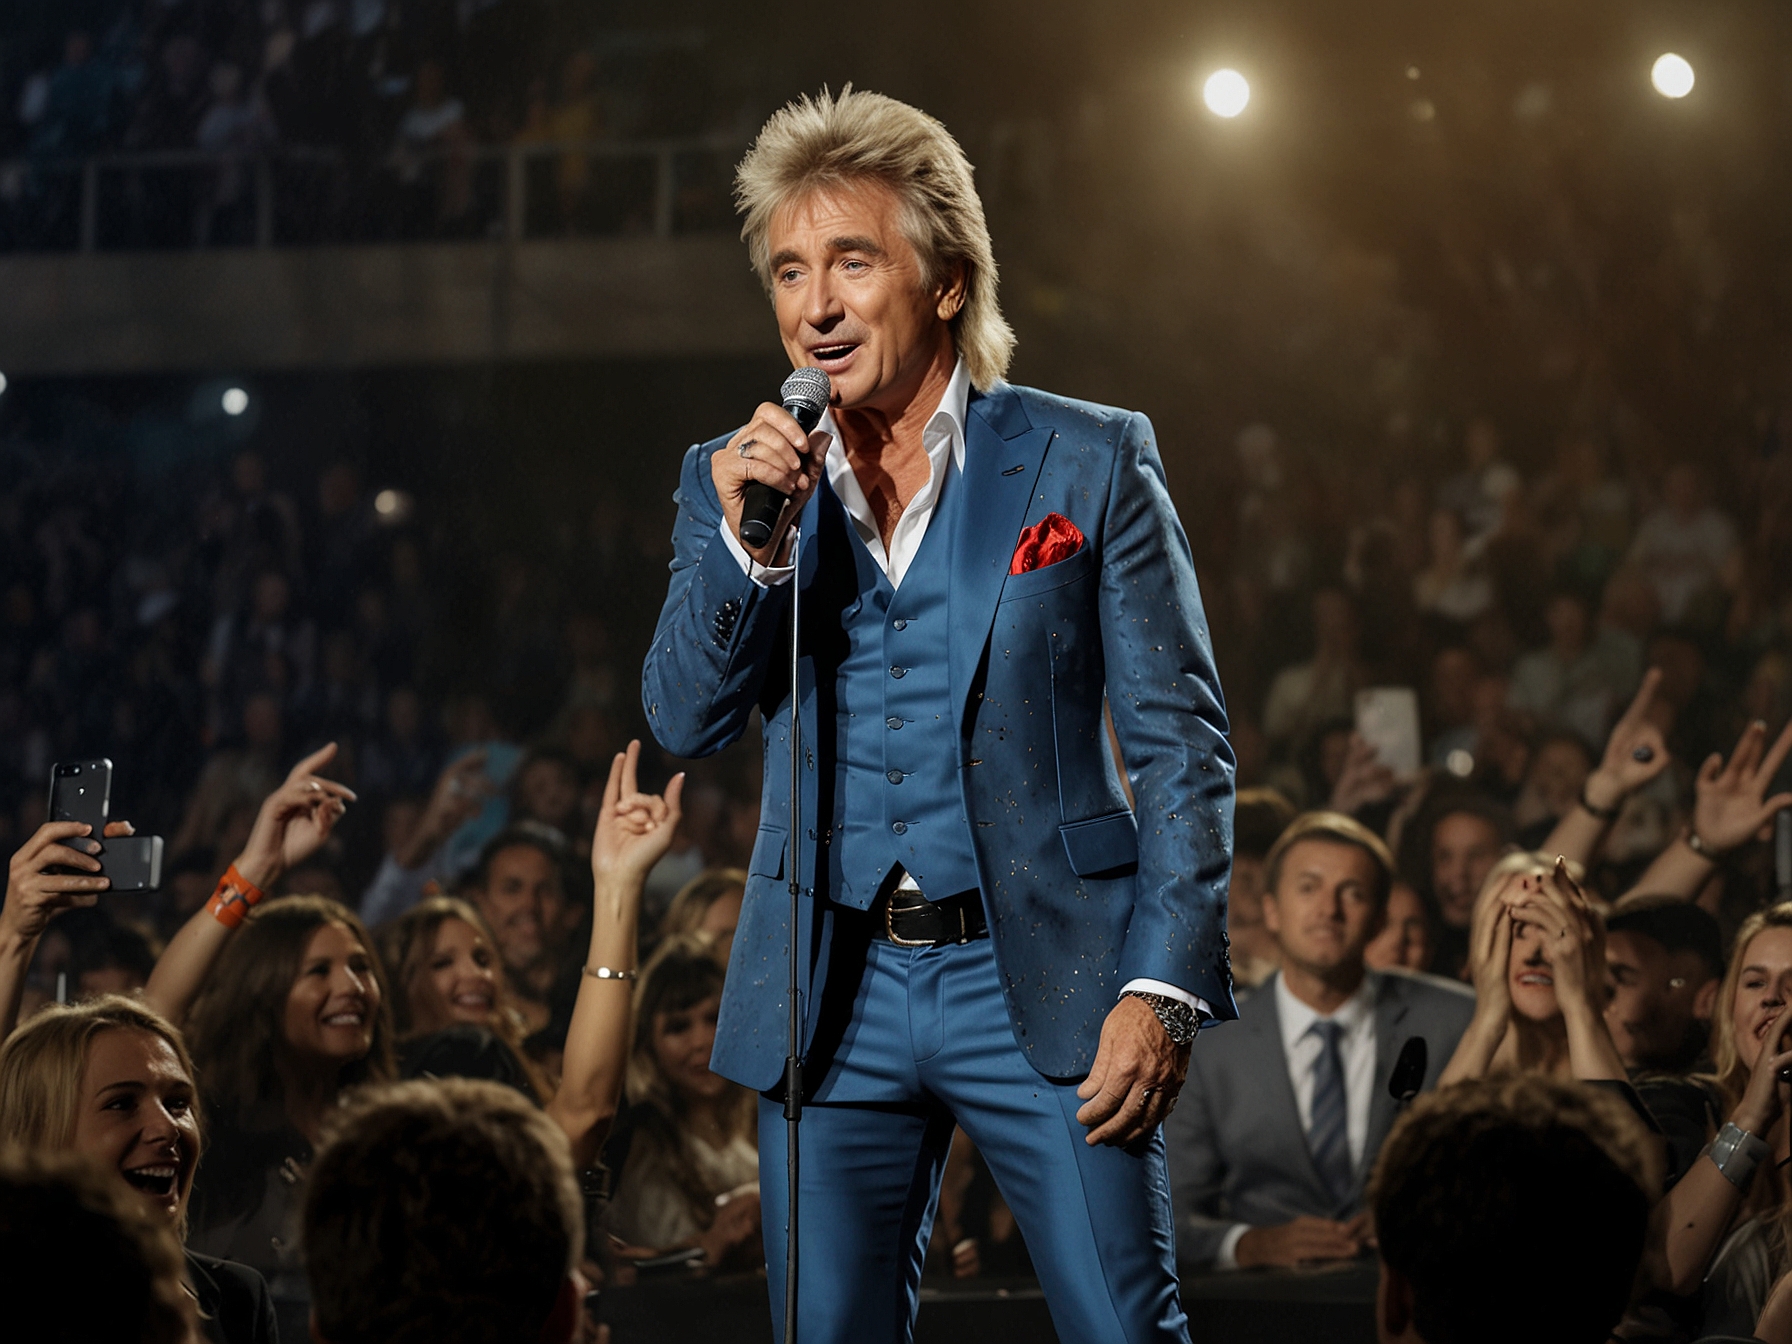 Photo of Rod Stewart performing on stage with a background image of Volodymyr Zelenskyy.